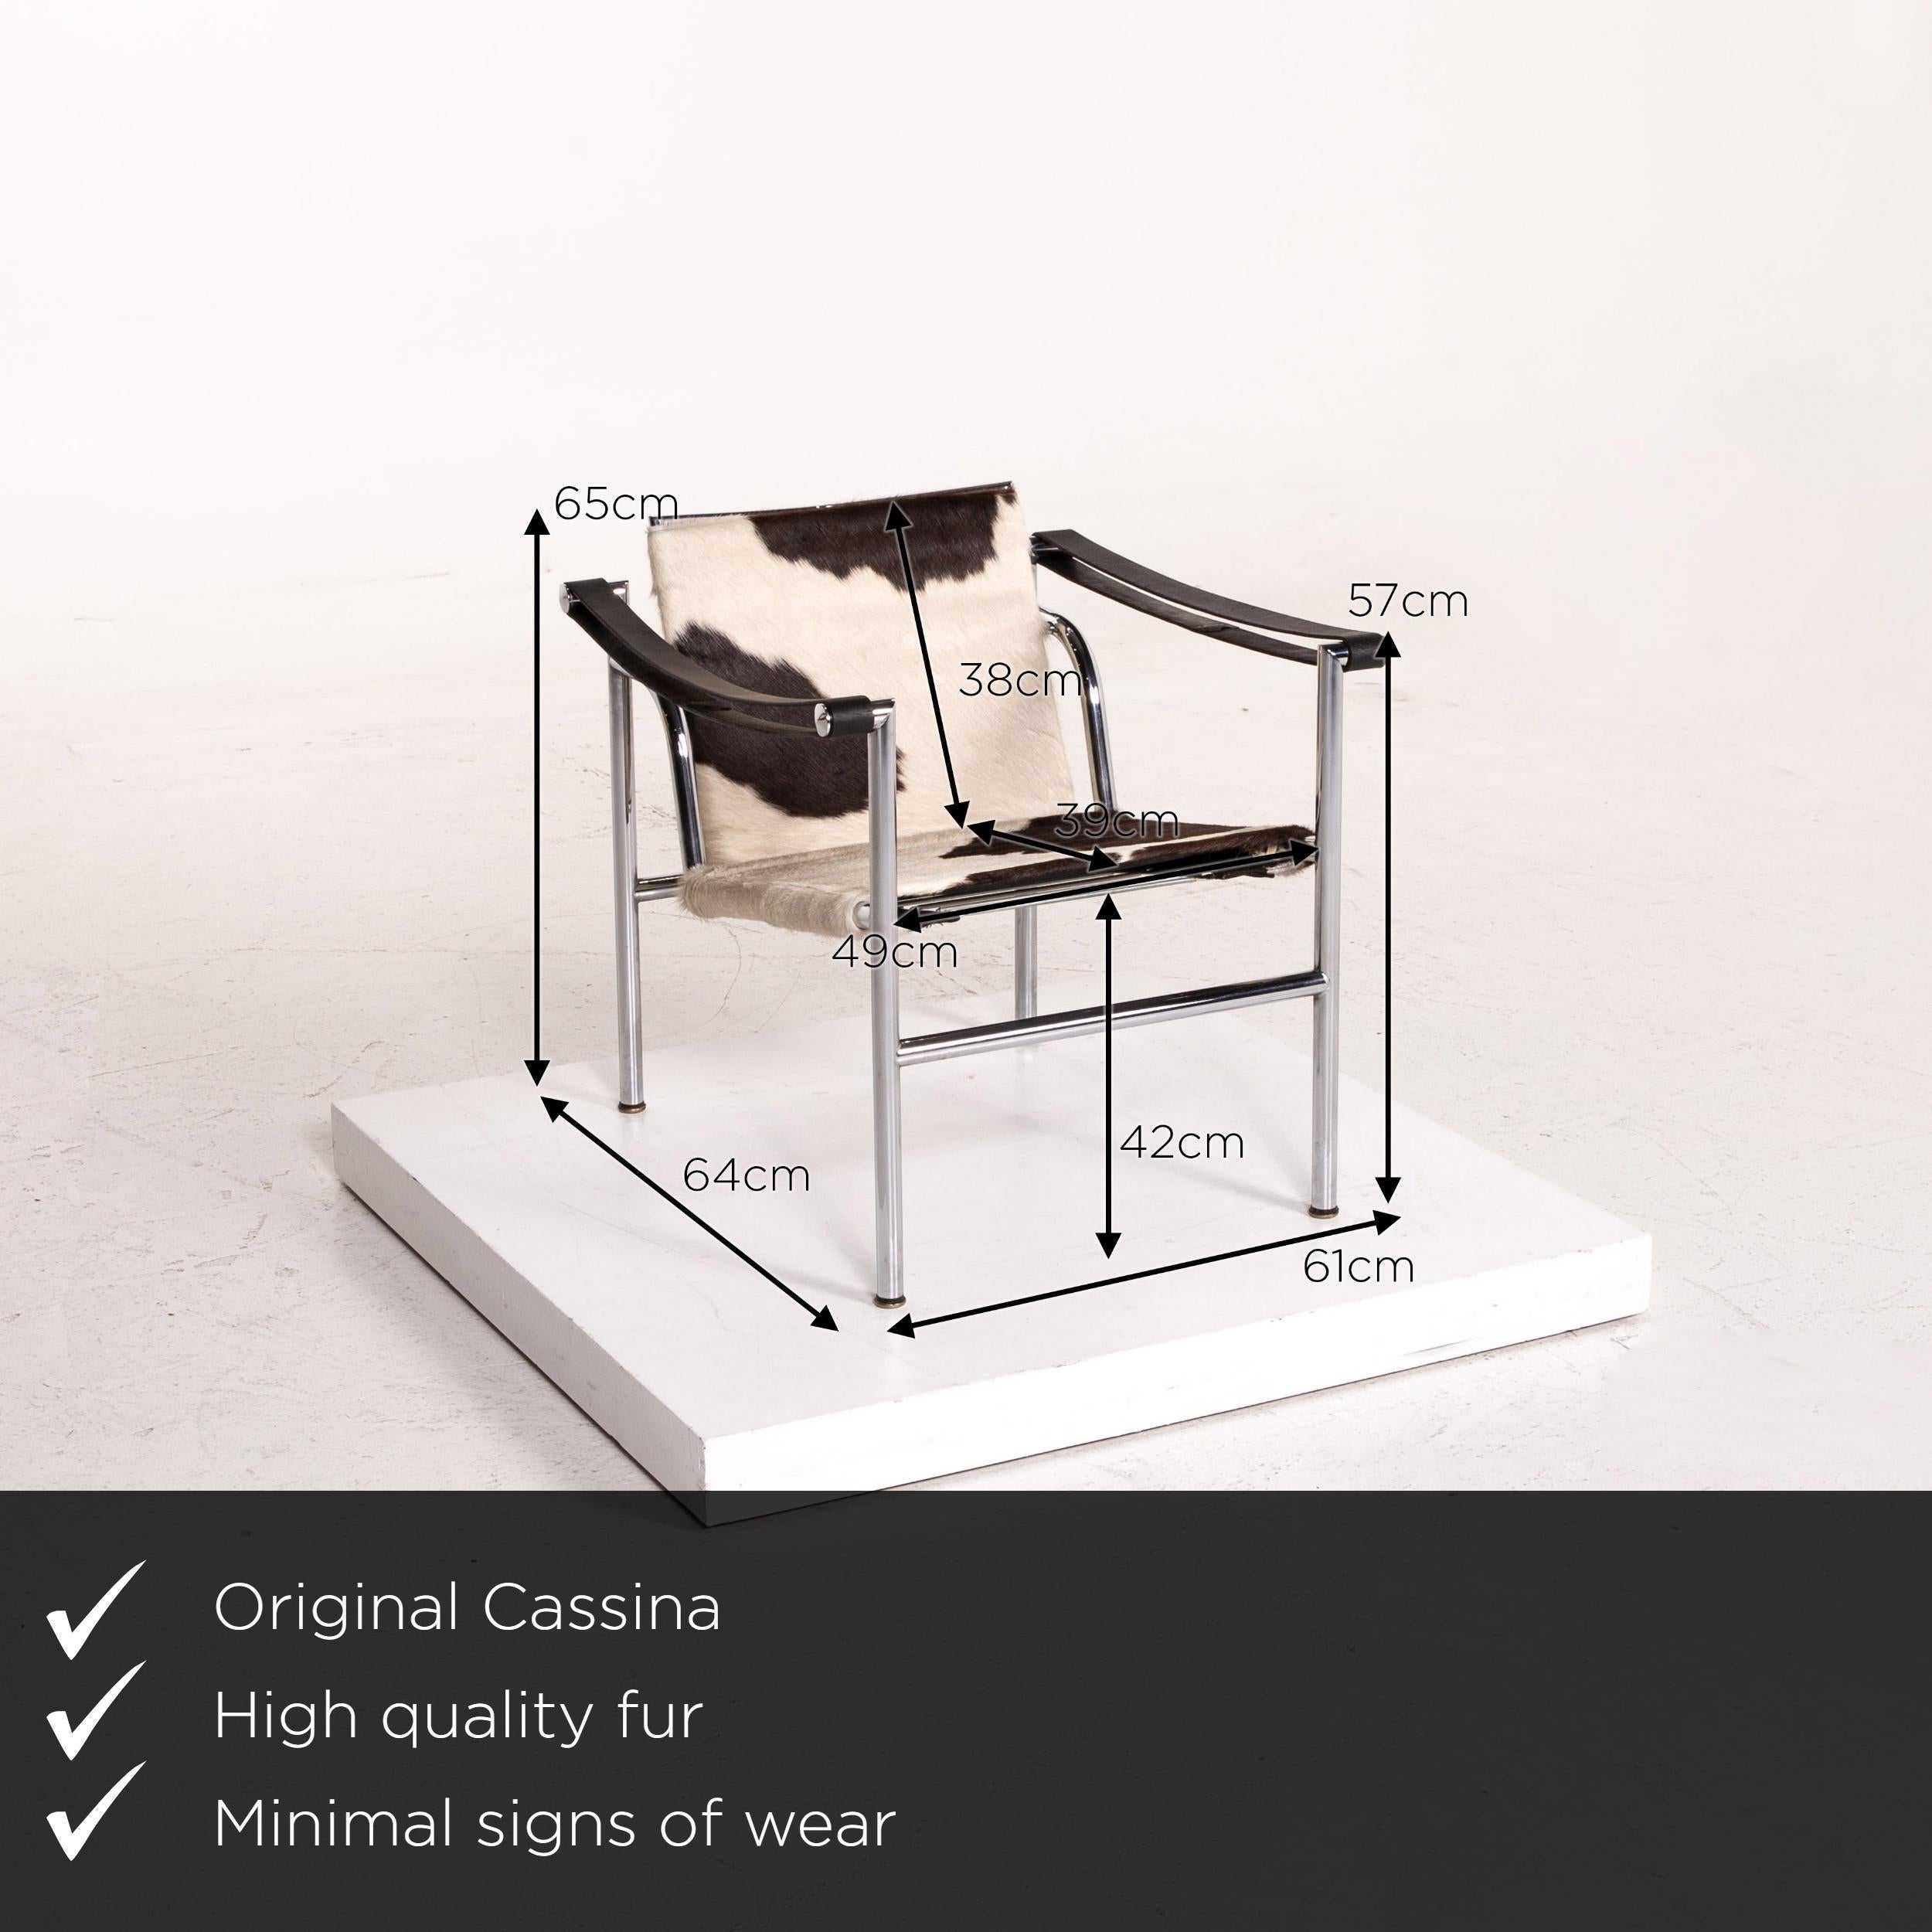 We present to you a Cassina Le Corbusier LC 1 fur leather chair white brown armchair.

 

 Product measurements in centimeters:
 

Depth 64
Width 61
Height 65
Seat height 42
Rest height 57
Seat depth 39
Seat width 49
Back height 38.